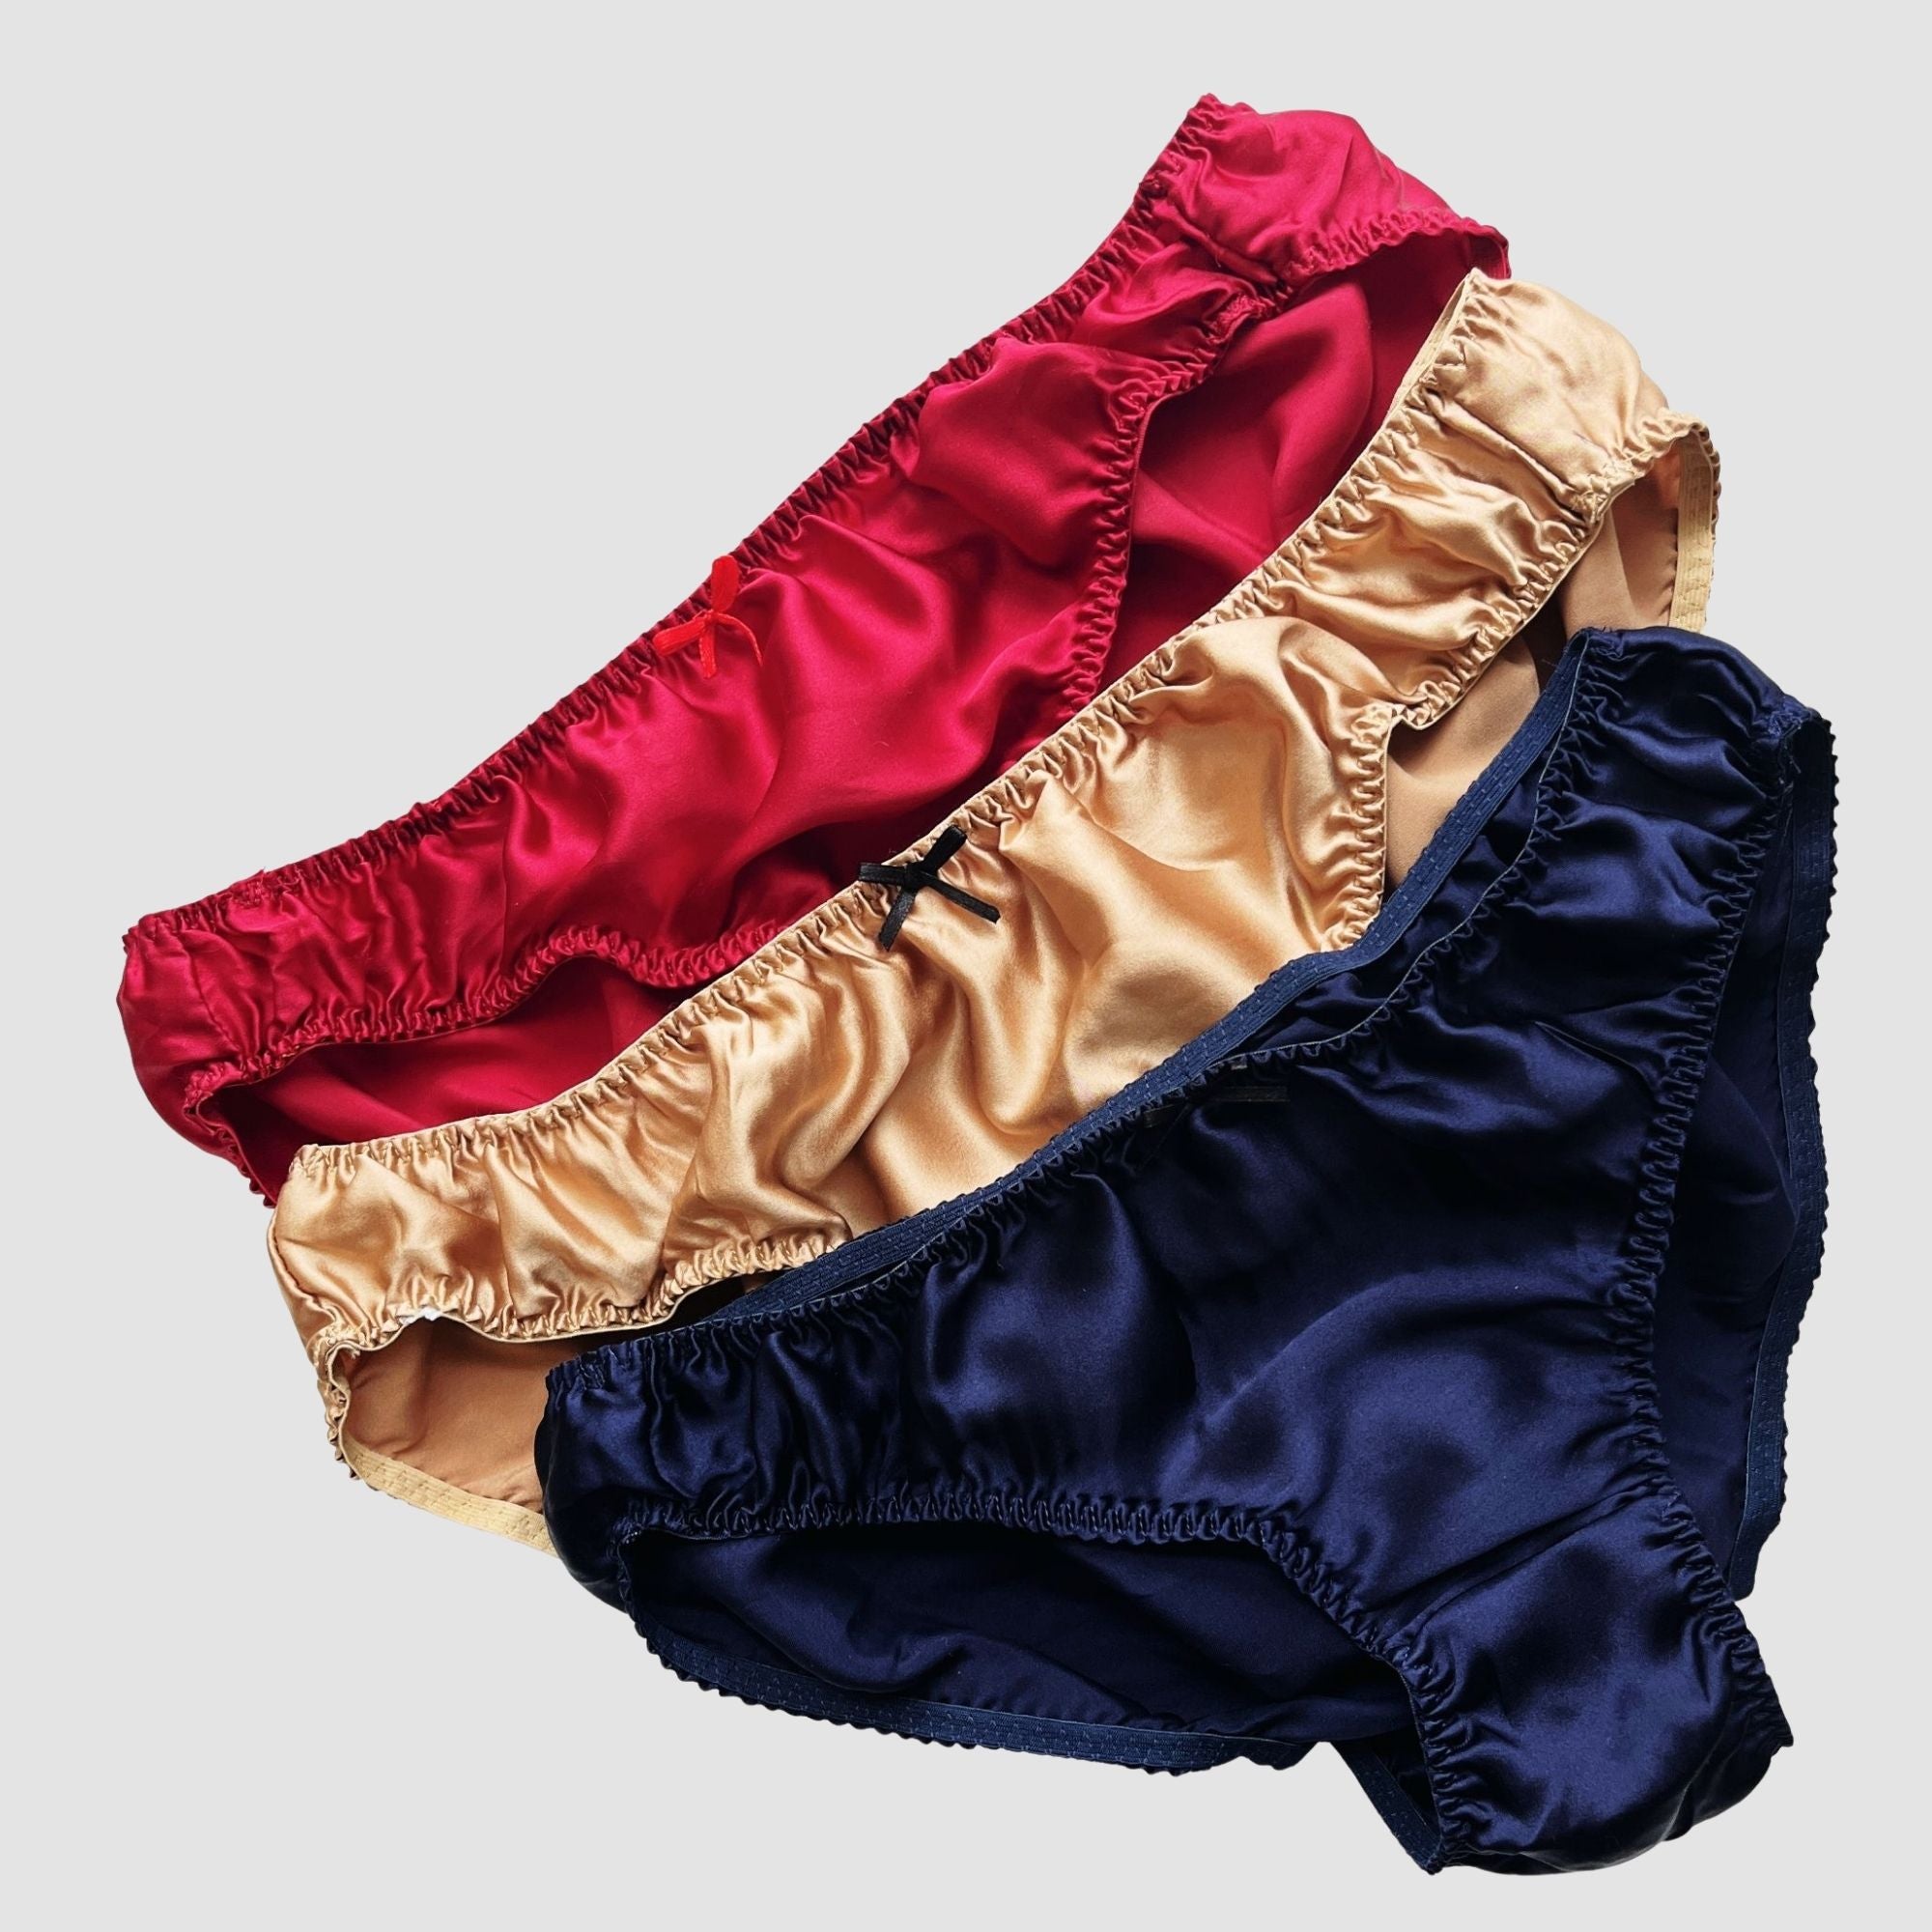 Wholesale comfortable panty satin In Sexy And Comfortable Styles